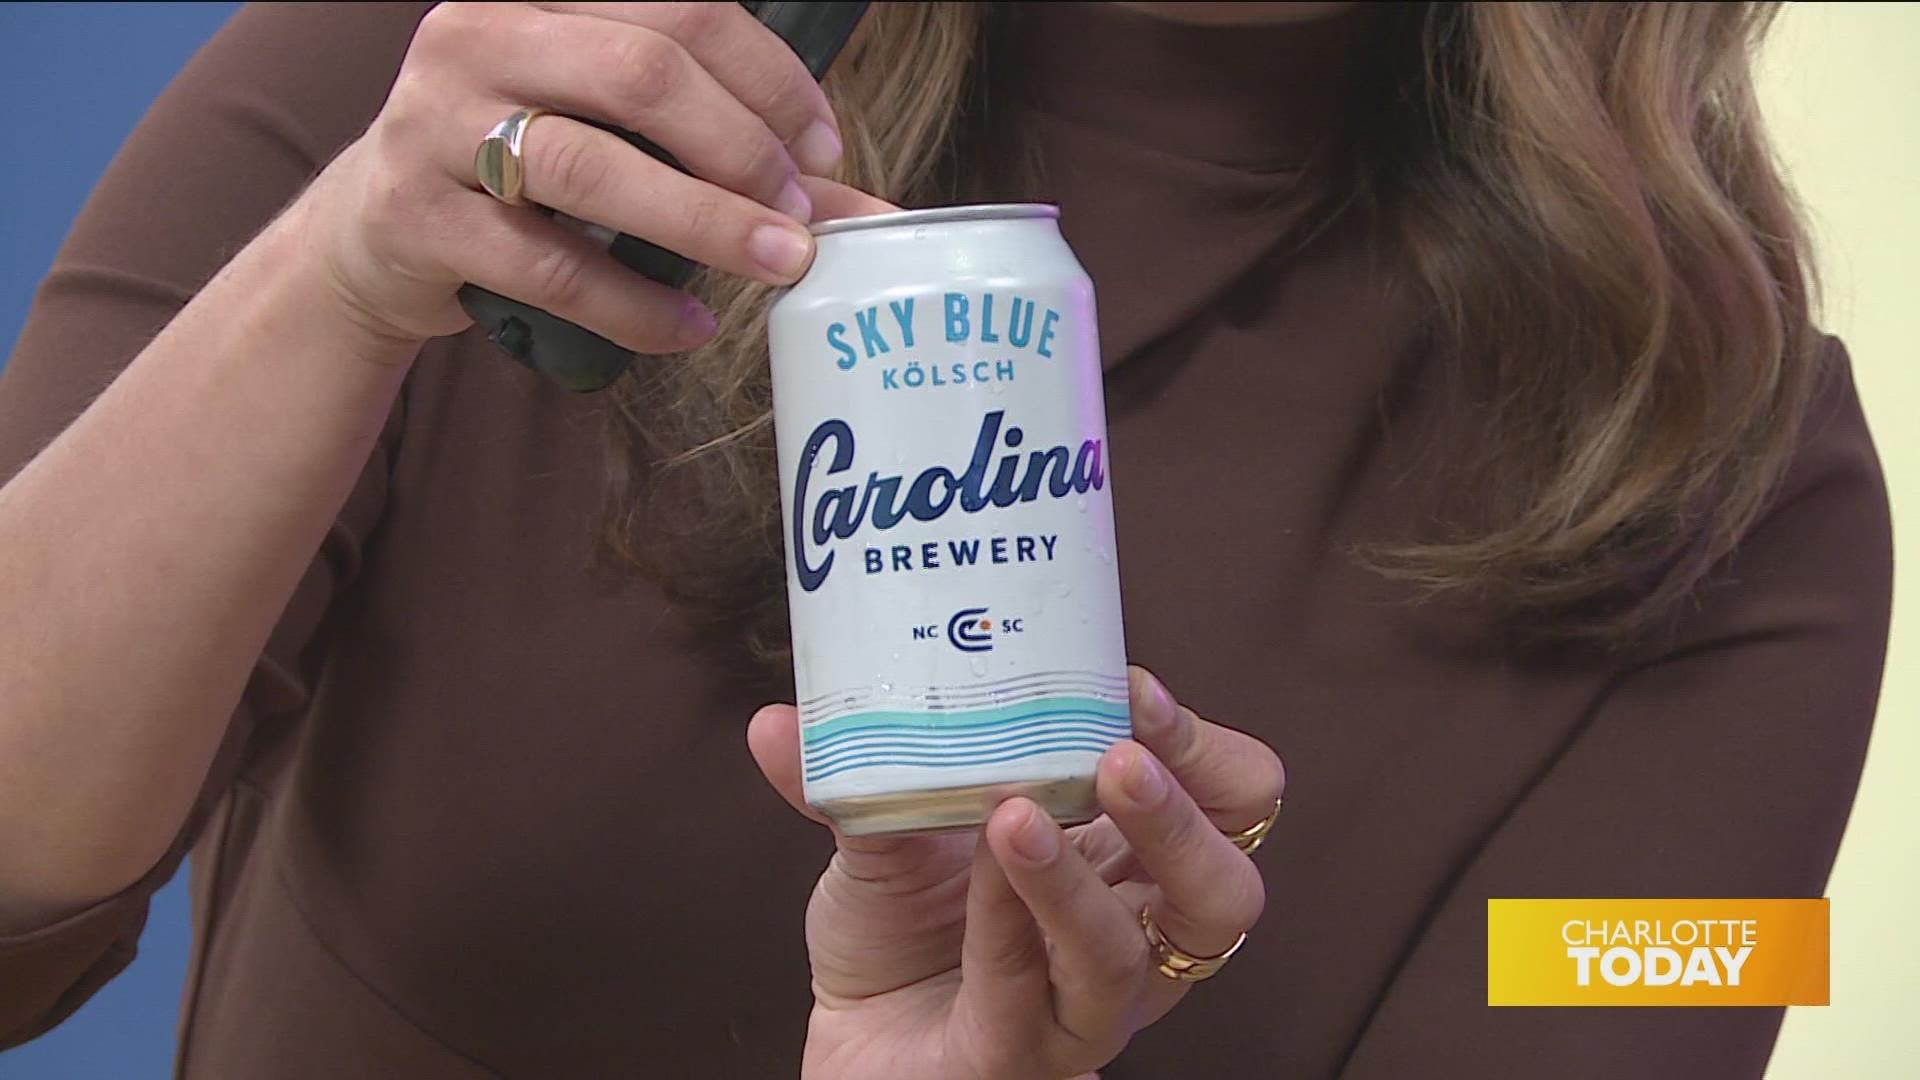 Carolina Brewery shares what to pair their beer with this summer